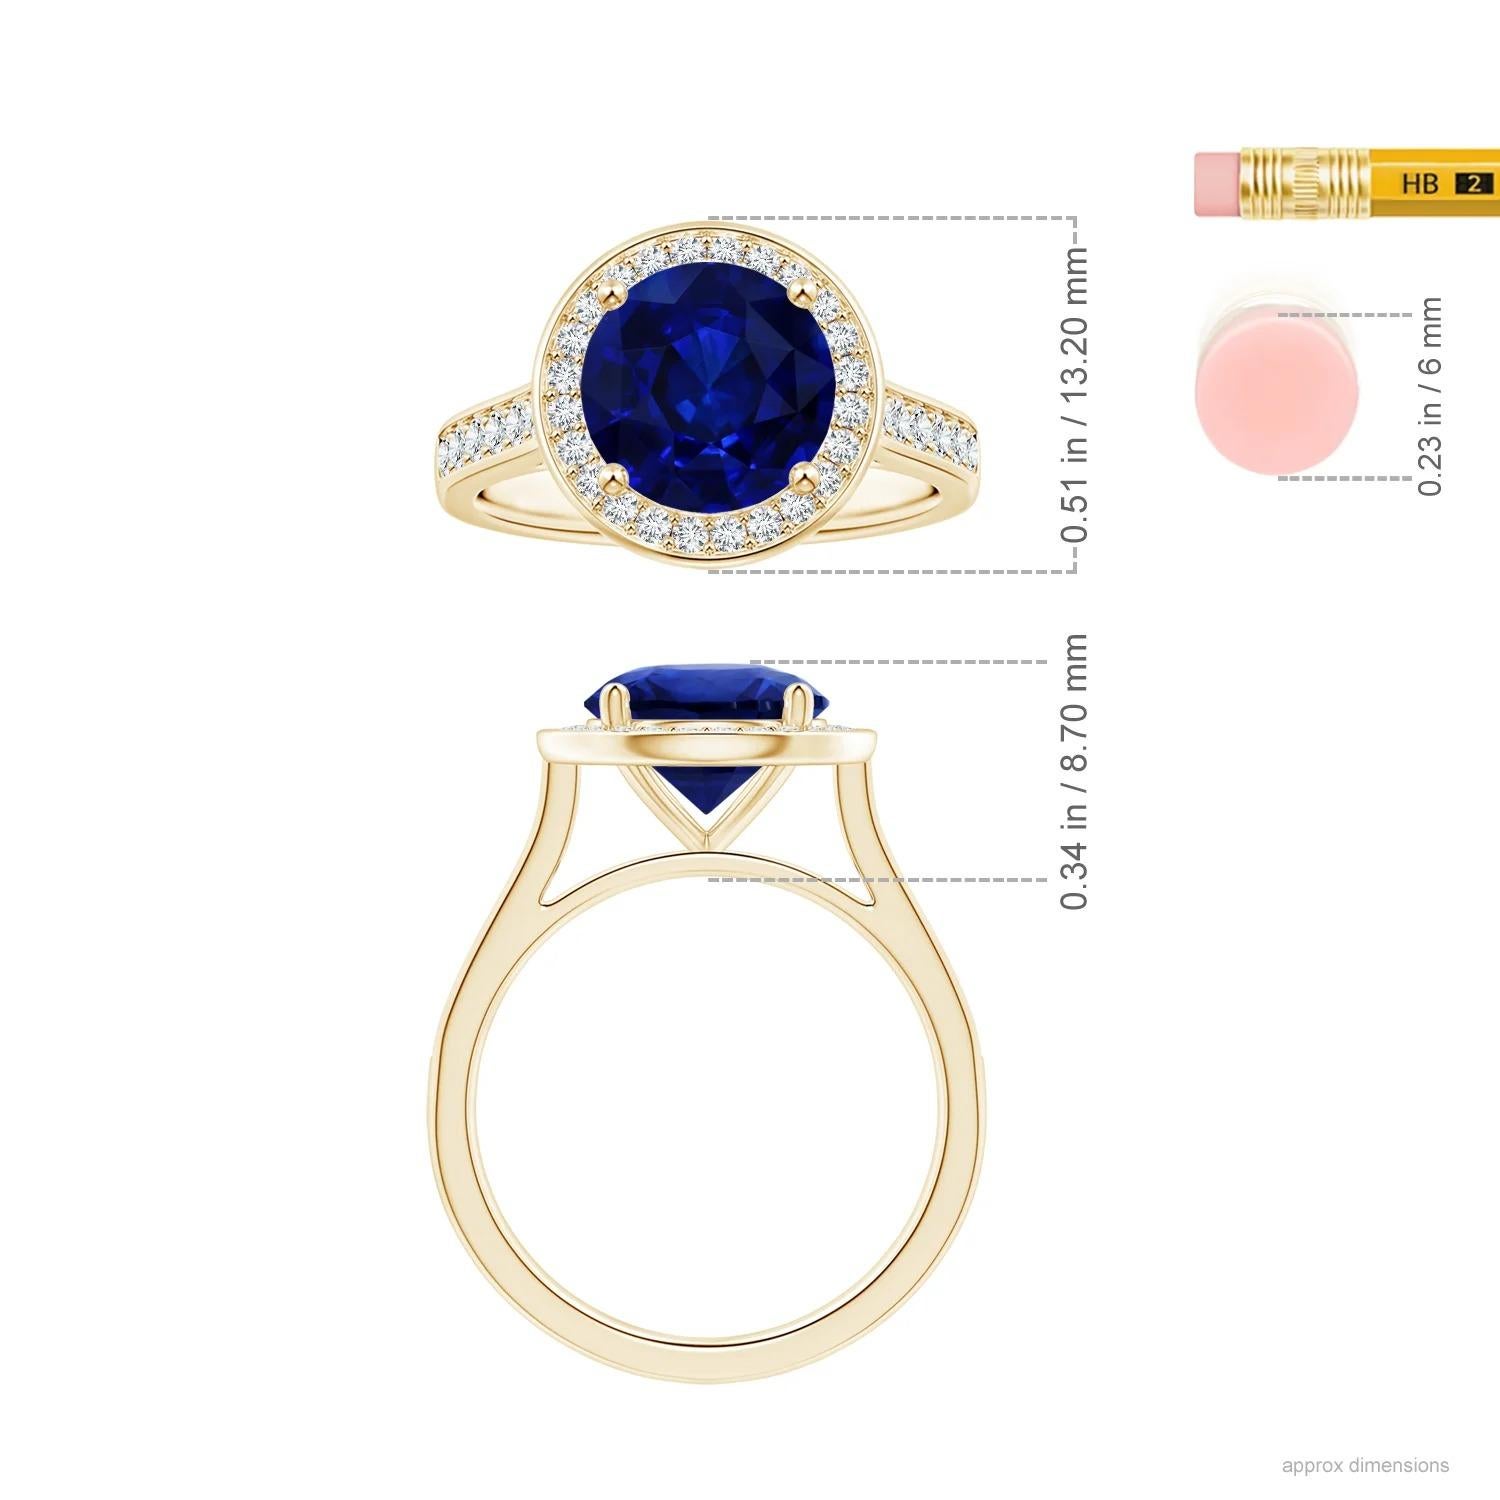 For Sale:  Angara GIA Certified Blue Sapphire Halo Ring in Yellow Gold with Diamonds 5